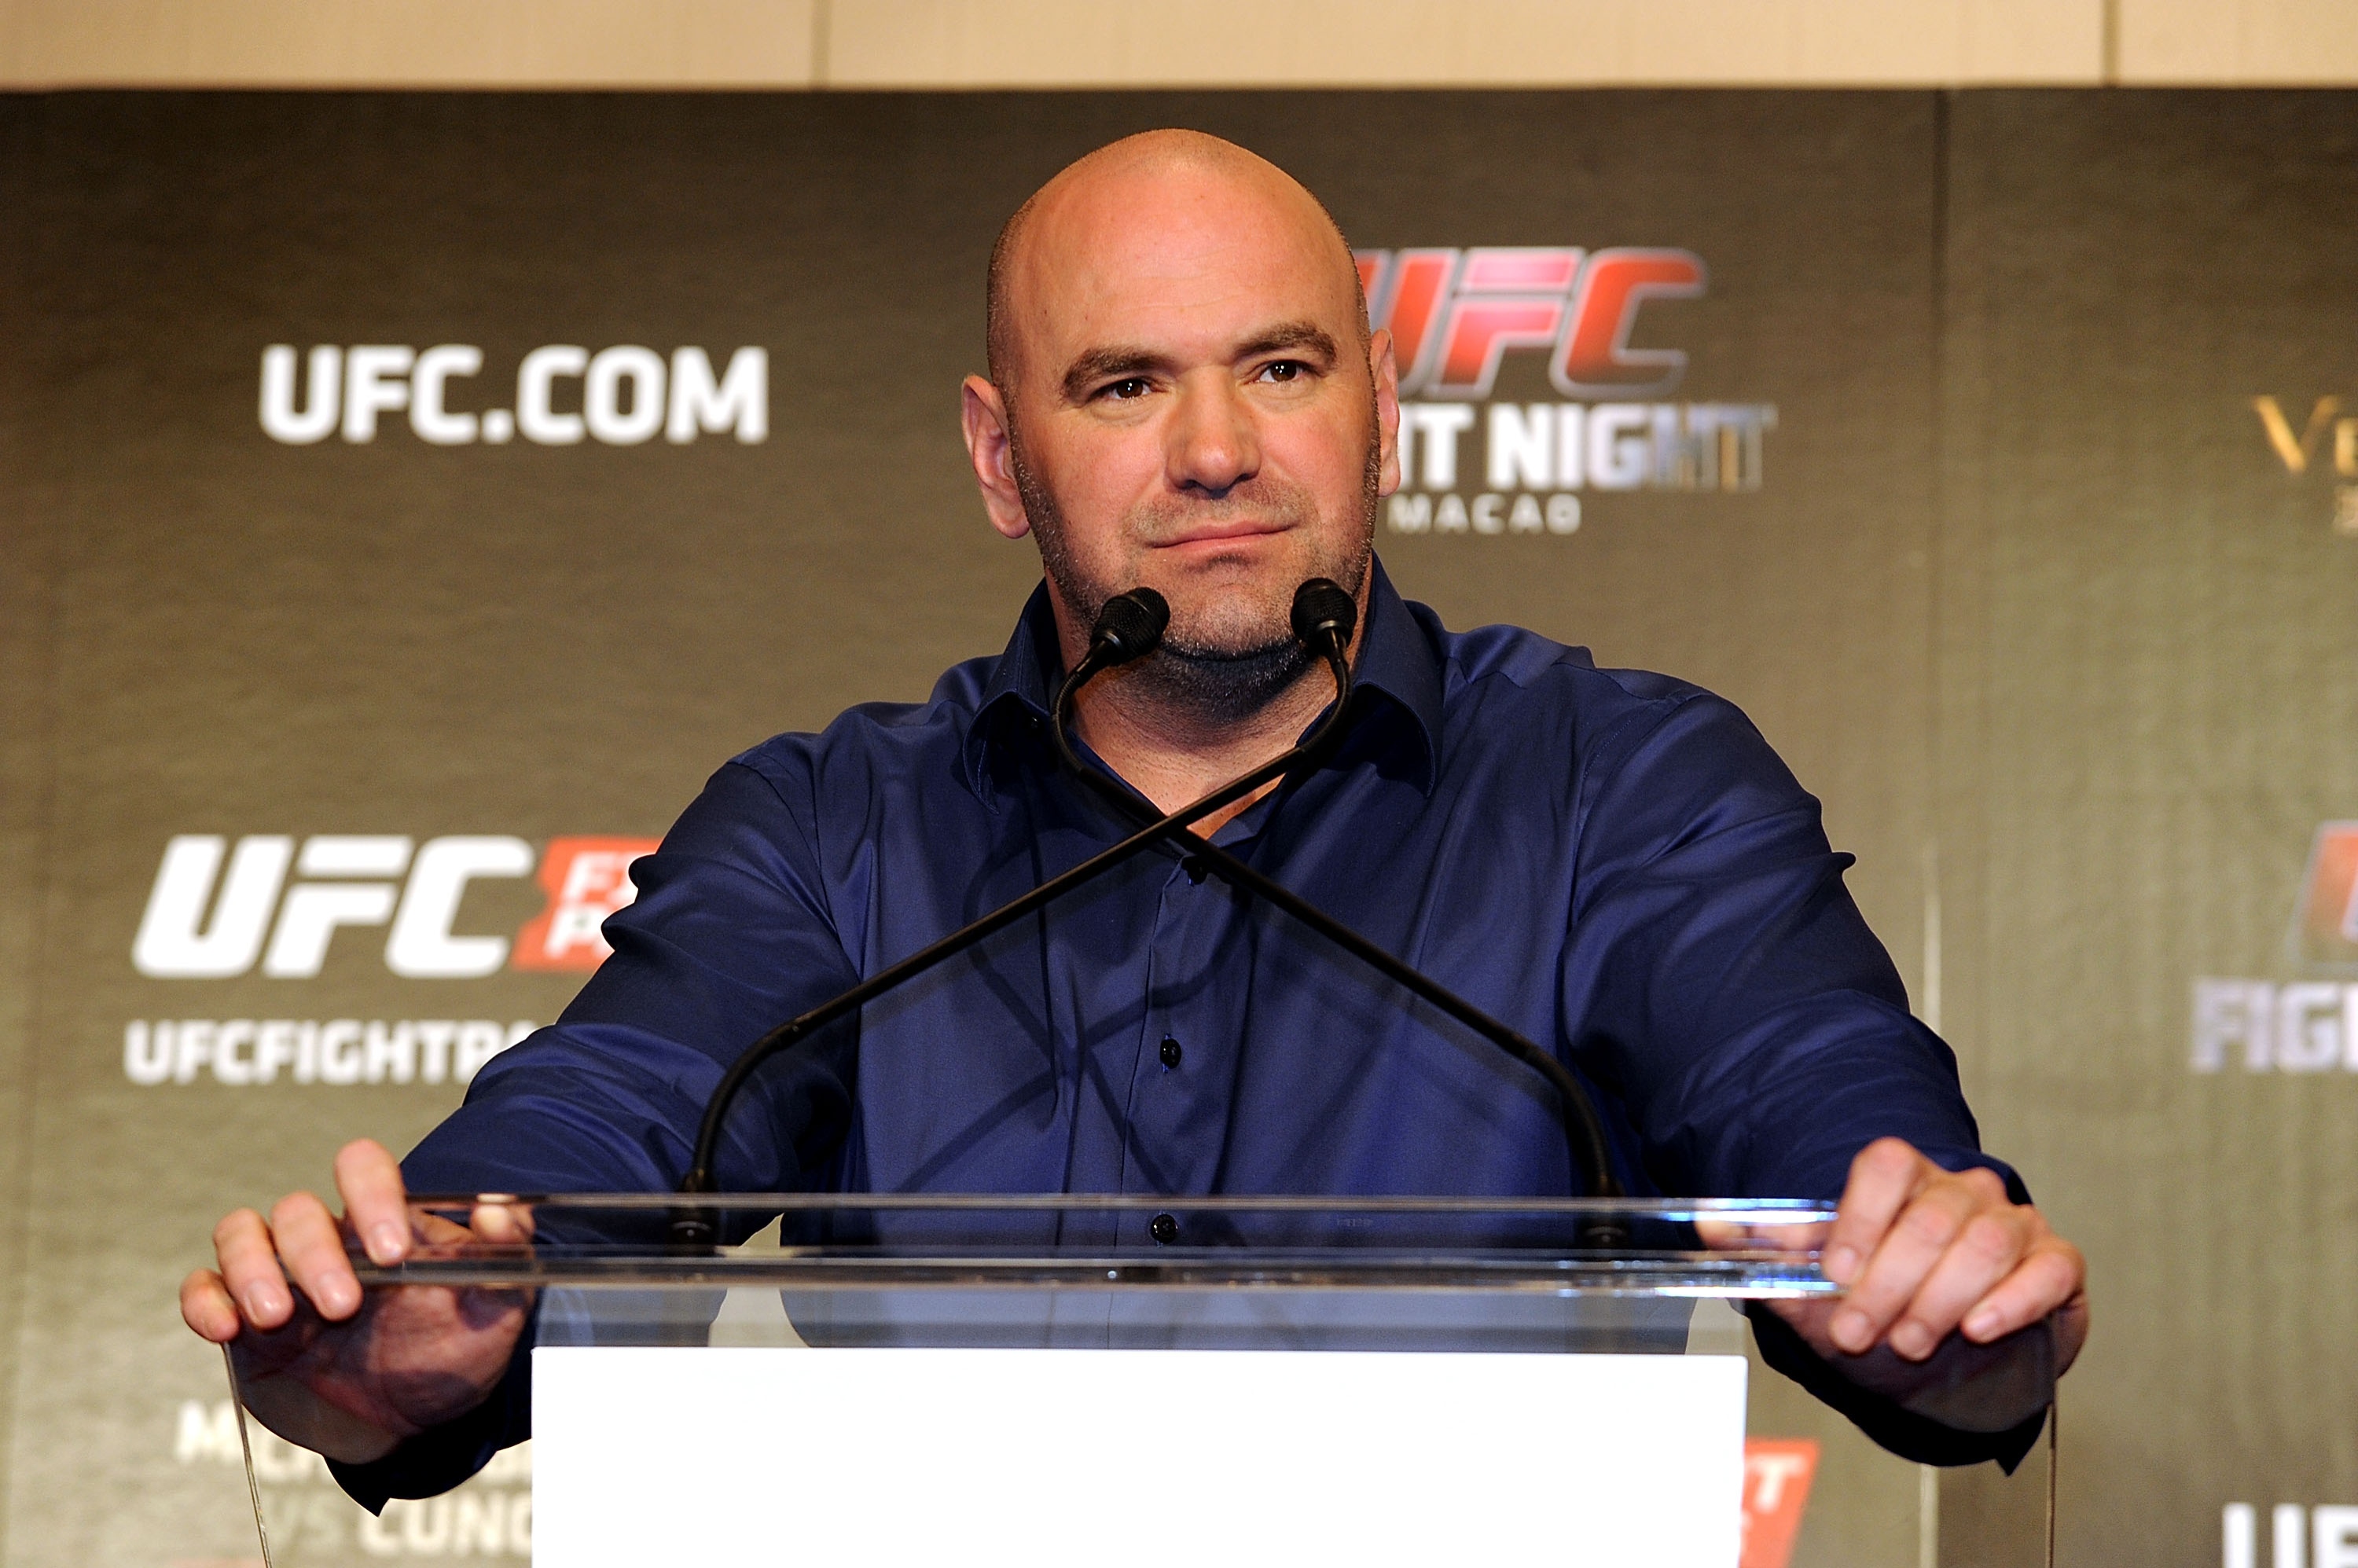 UFC president Dana White speaks at a news conference in Hong Kong. (Photo by Jayne Russell/Getty Images)